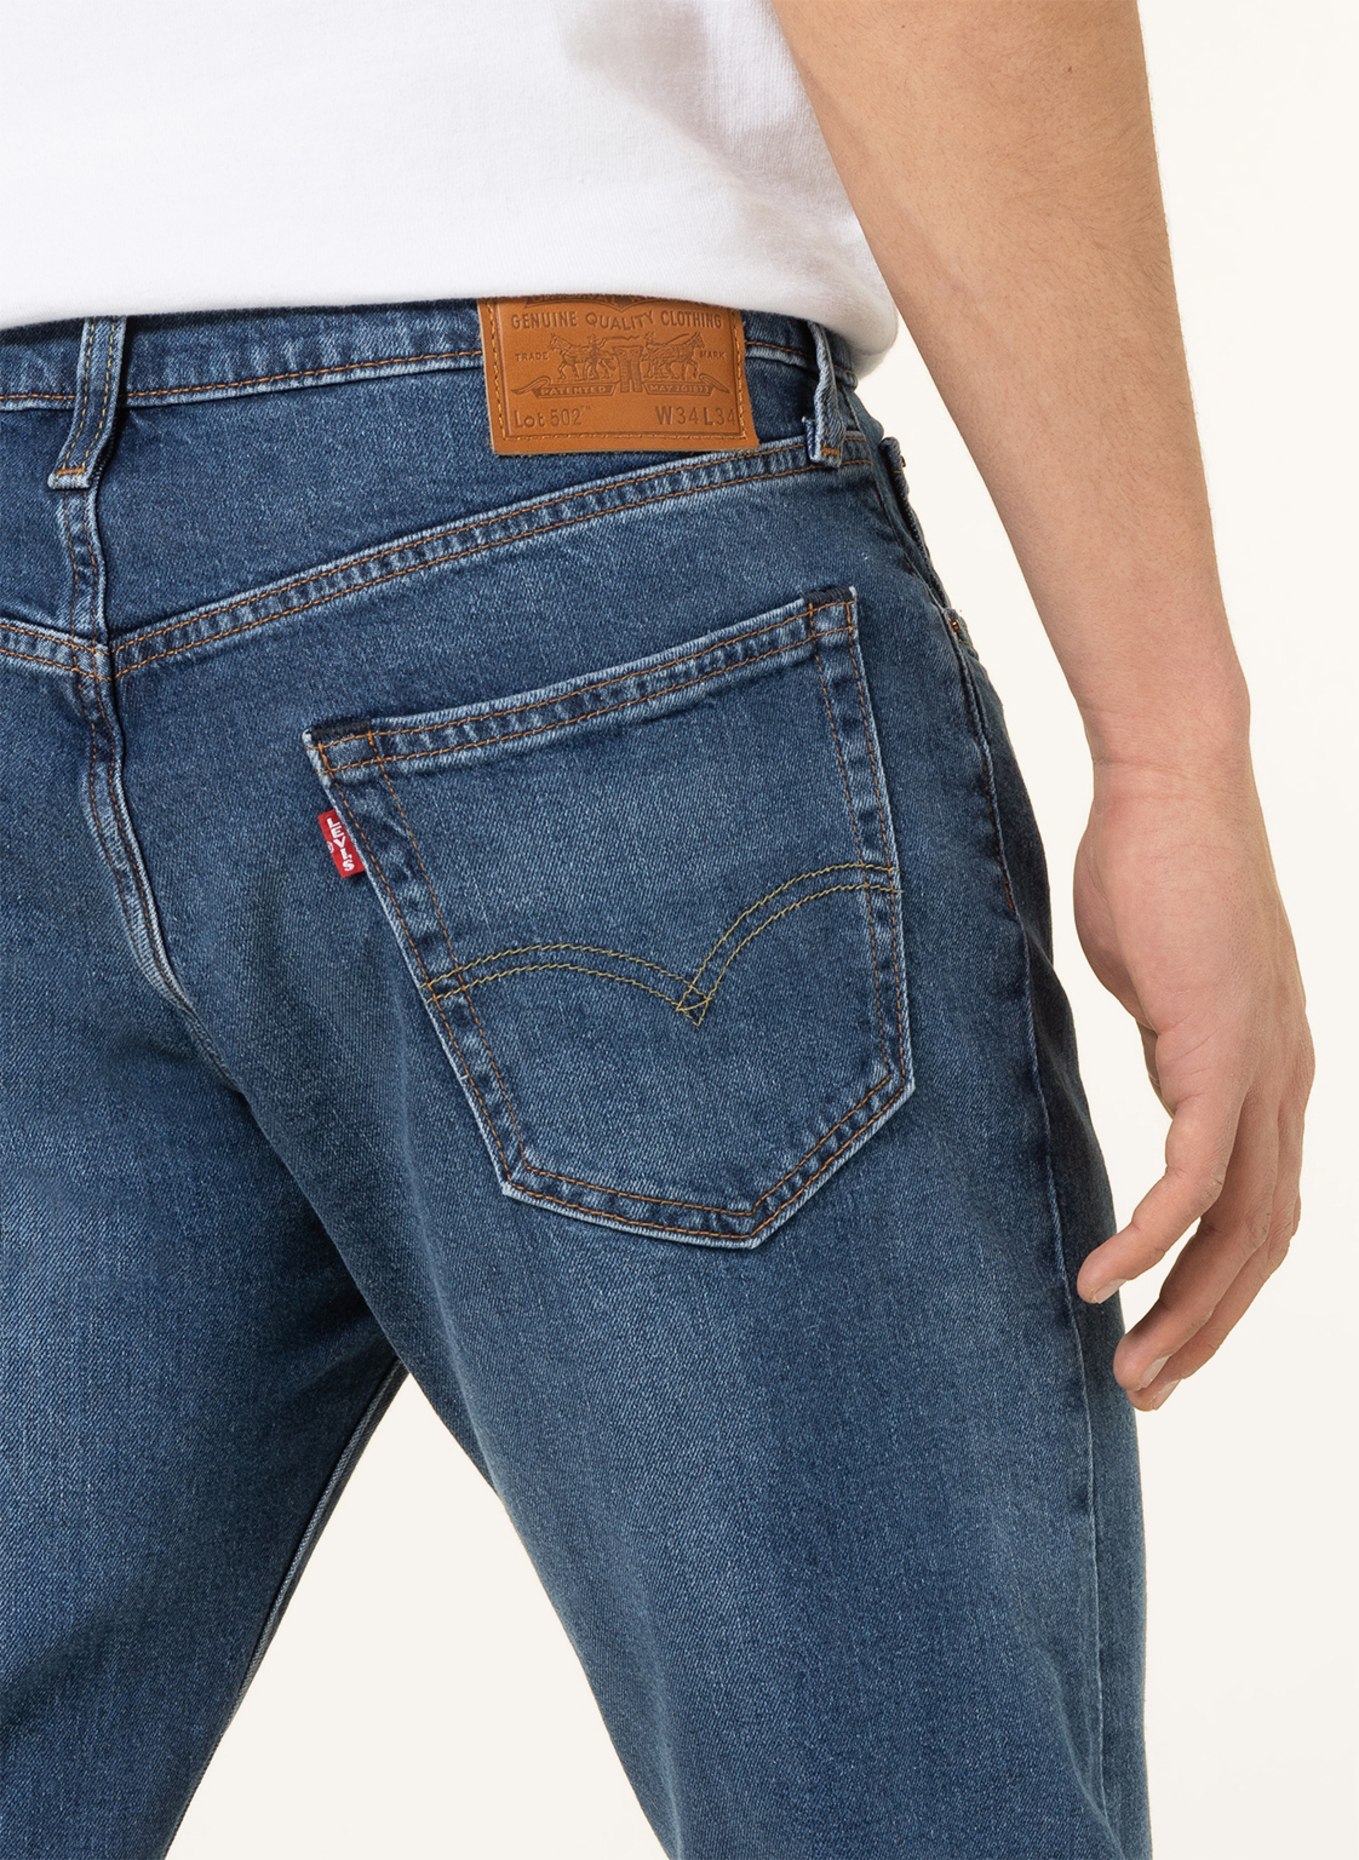 Levi's® Jeans 502 tapered fit, Color: 77 Dark Indigo - Worn In (Image 5)